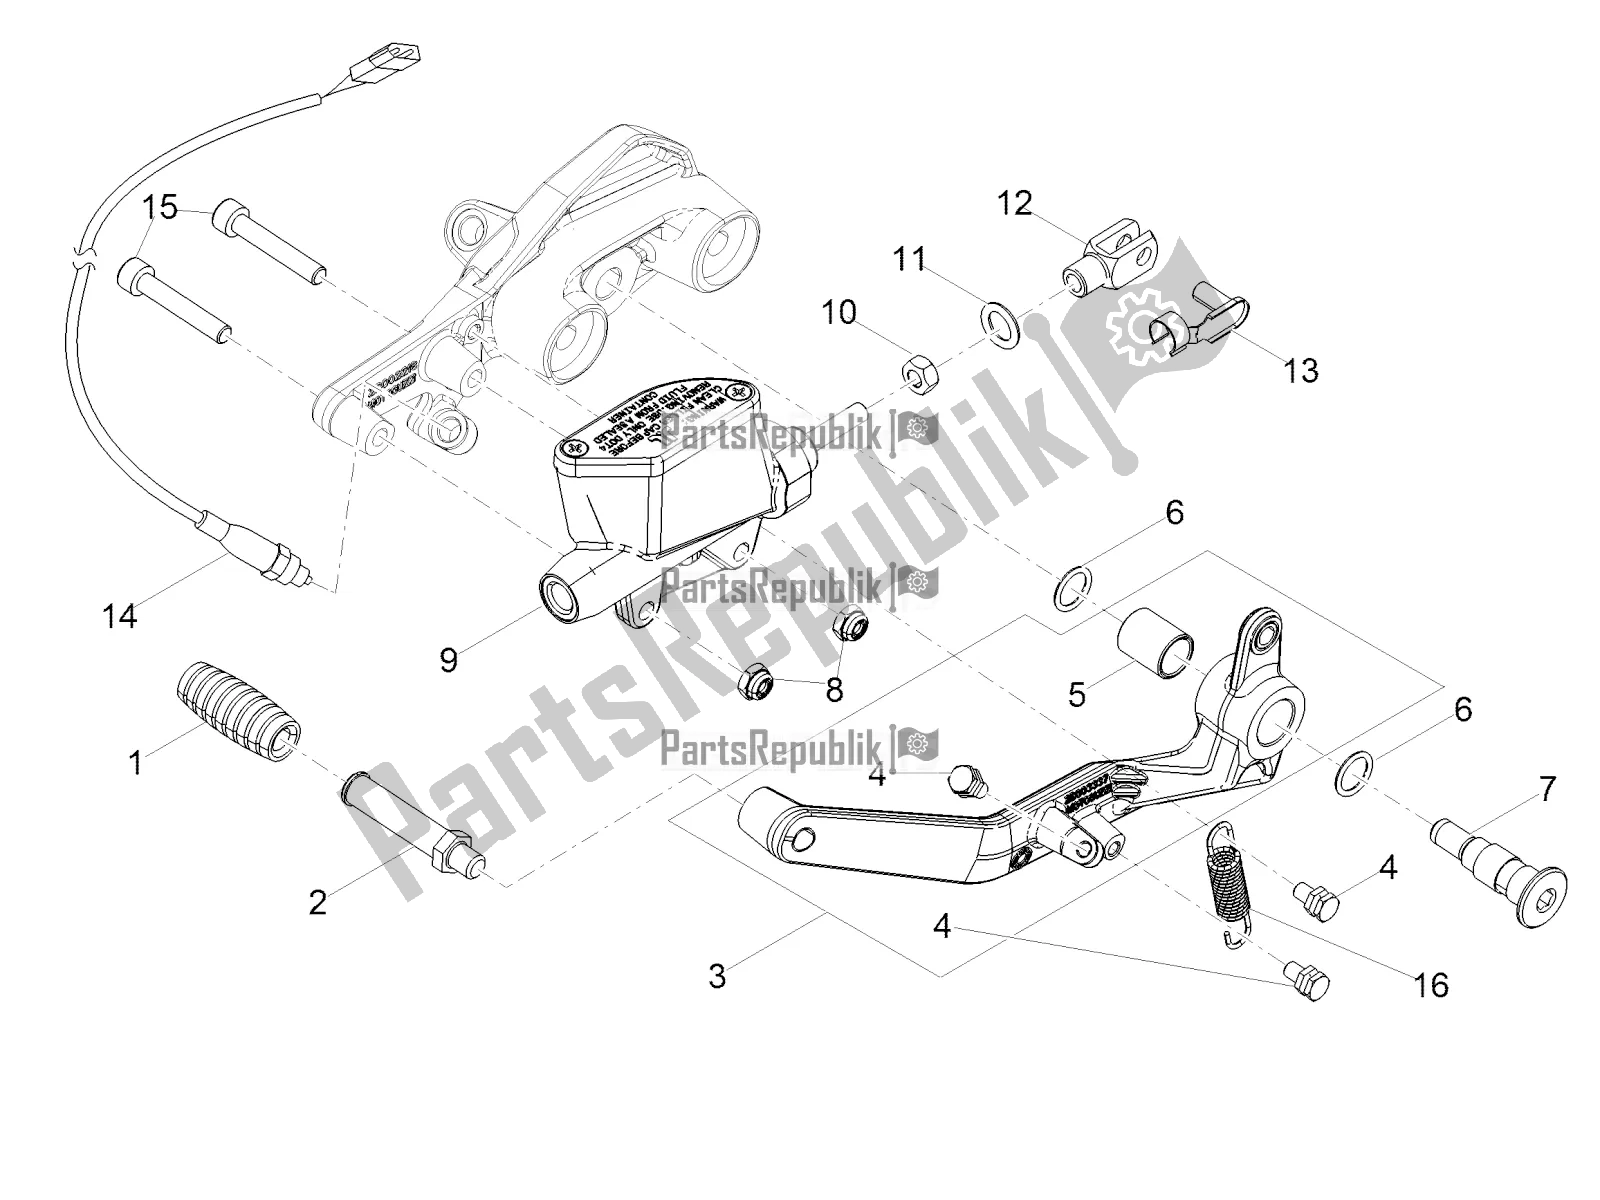 All parts for the Rear Master Cylinder of the Moto-Guzzi V7 III Rough 750 Apac 2020